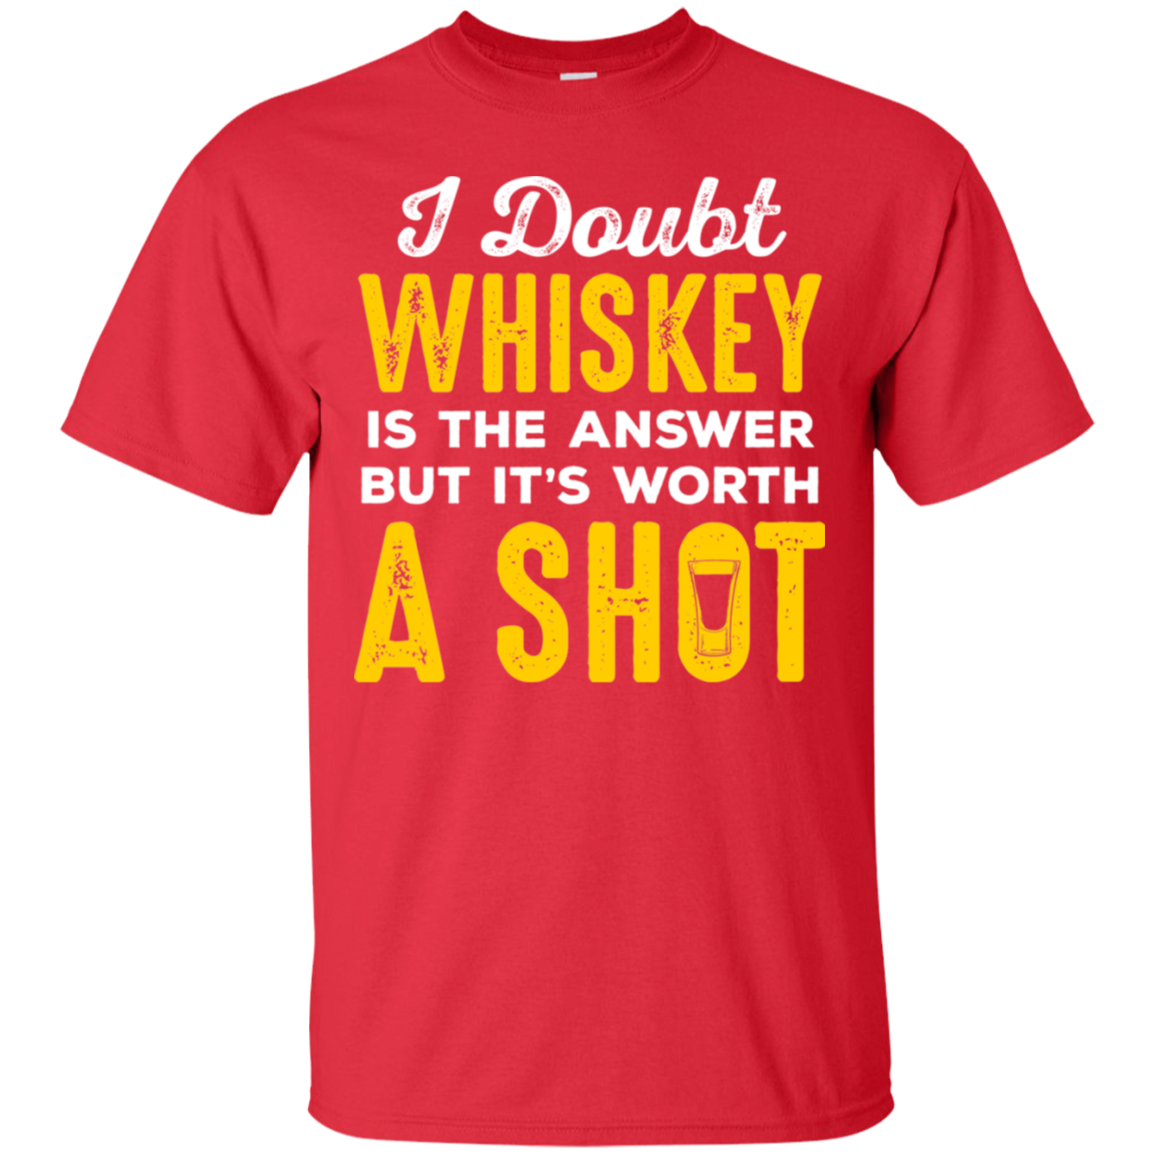 I Doubt Whiskey Is The Answer But It's Worth A Shot T-Shirt Apparel - The Beer Lodge